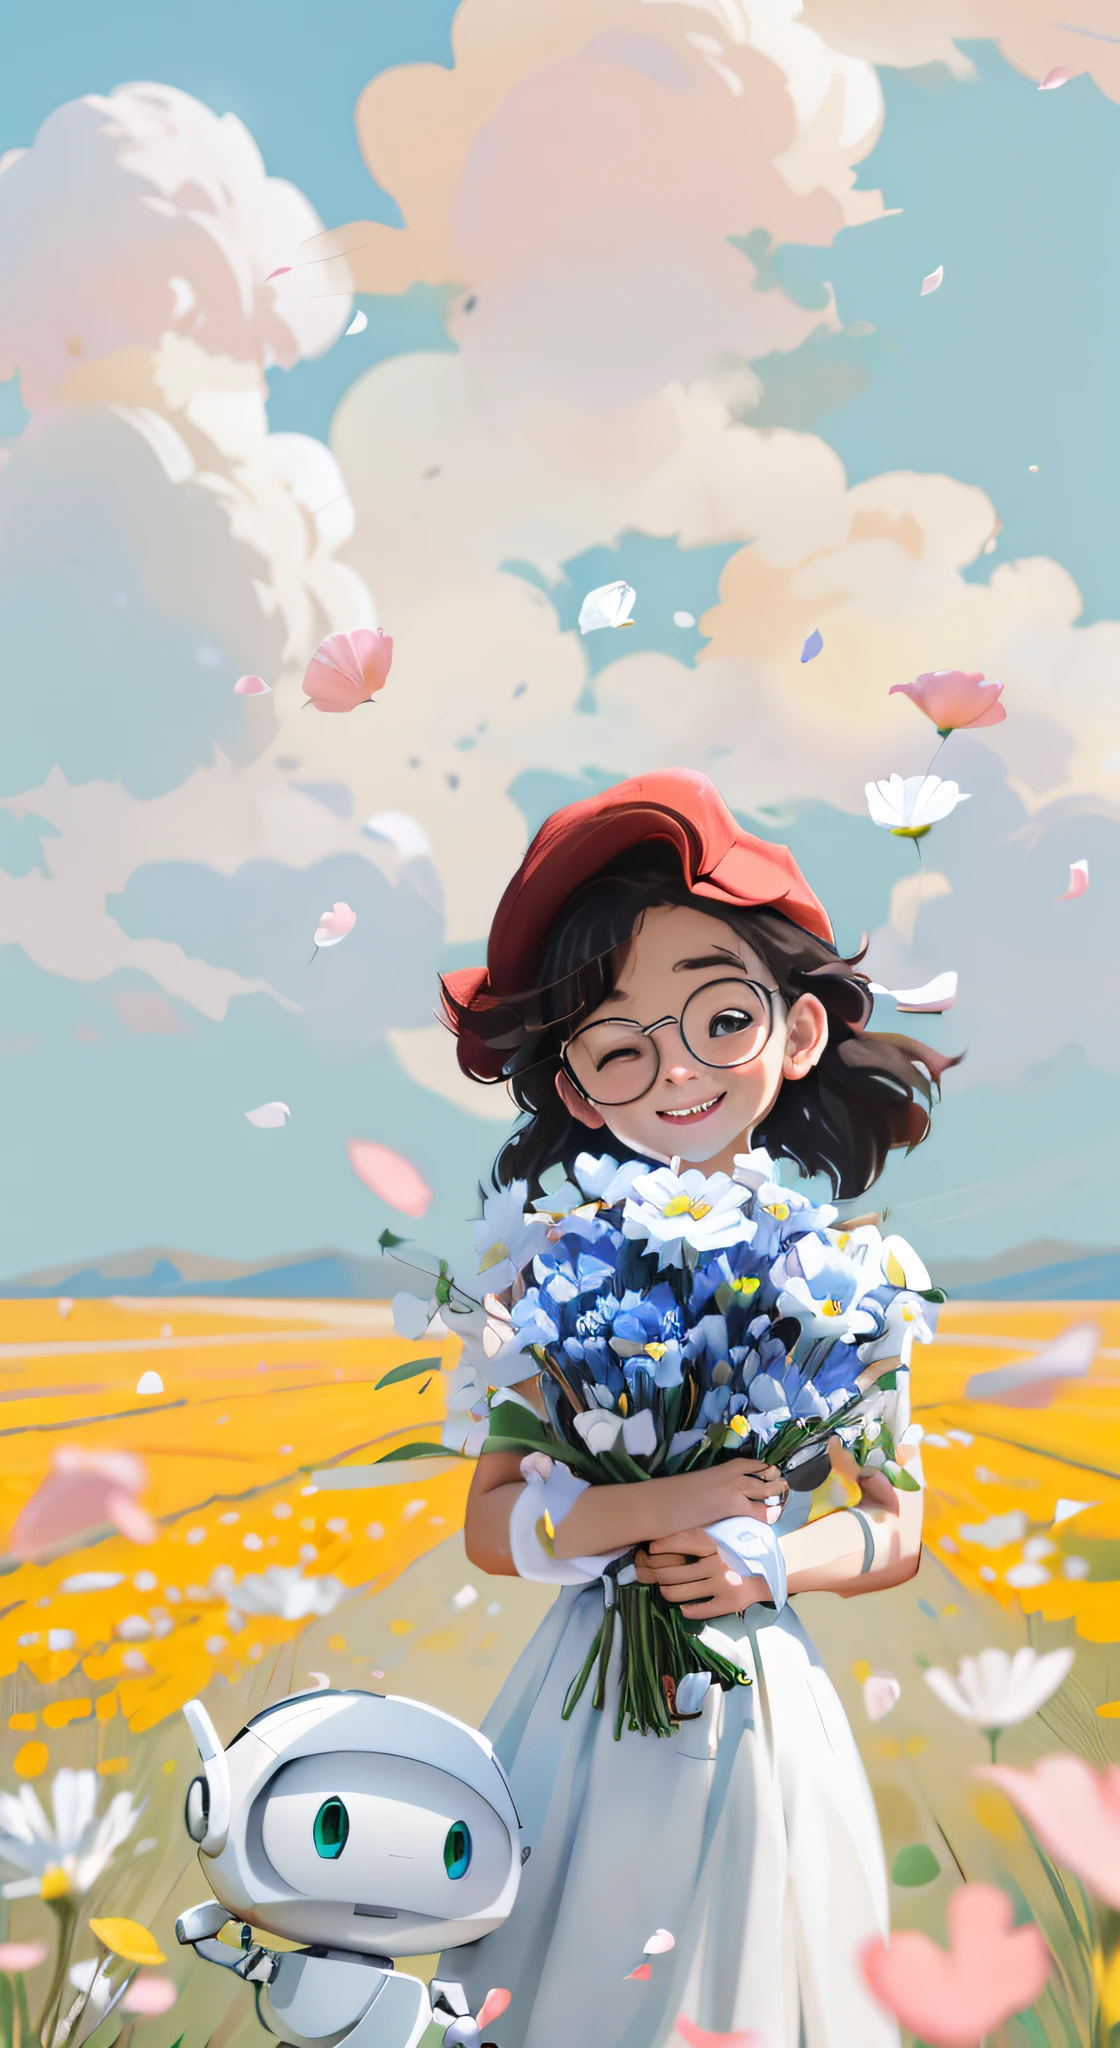 long hair girl，（No hats），（Girls don't have hats），white dresses，Girl in white dress without hat holding a bouquet of flowers，（There is a small white robot nearby），（white robot），digitial painting, Holding flowers, holding magic flowers, grassy fields，blue-sky，Fluttering petals，realisticlying，Ultra photo realsisim，by Atey Ghailan, Inspired by Atey ghailan, Detailed digital art, , number art, atey ghailan 8 k, Happy girl, 🌺 CGSesociety